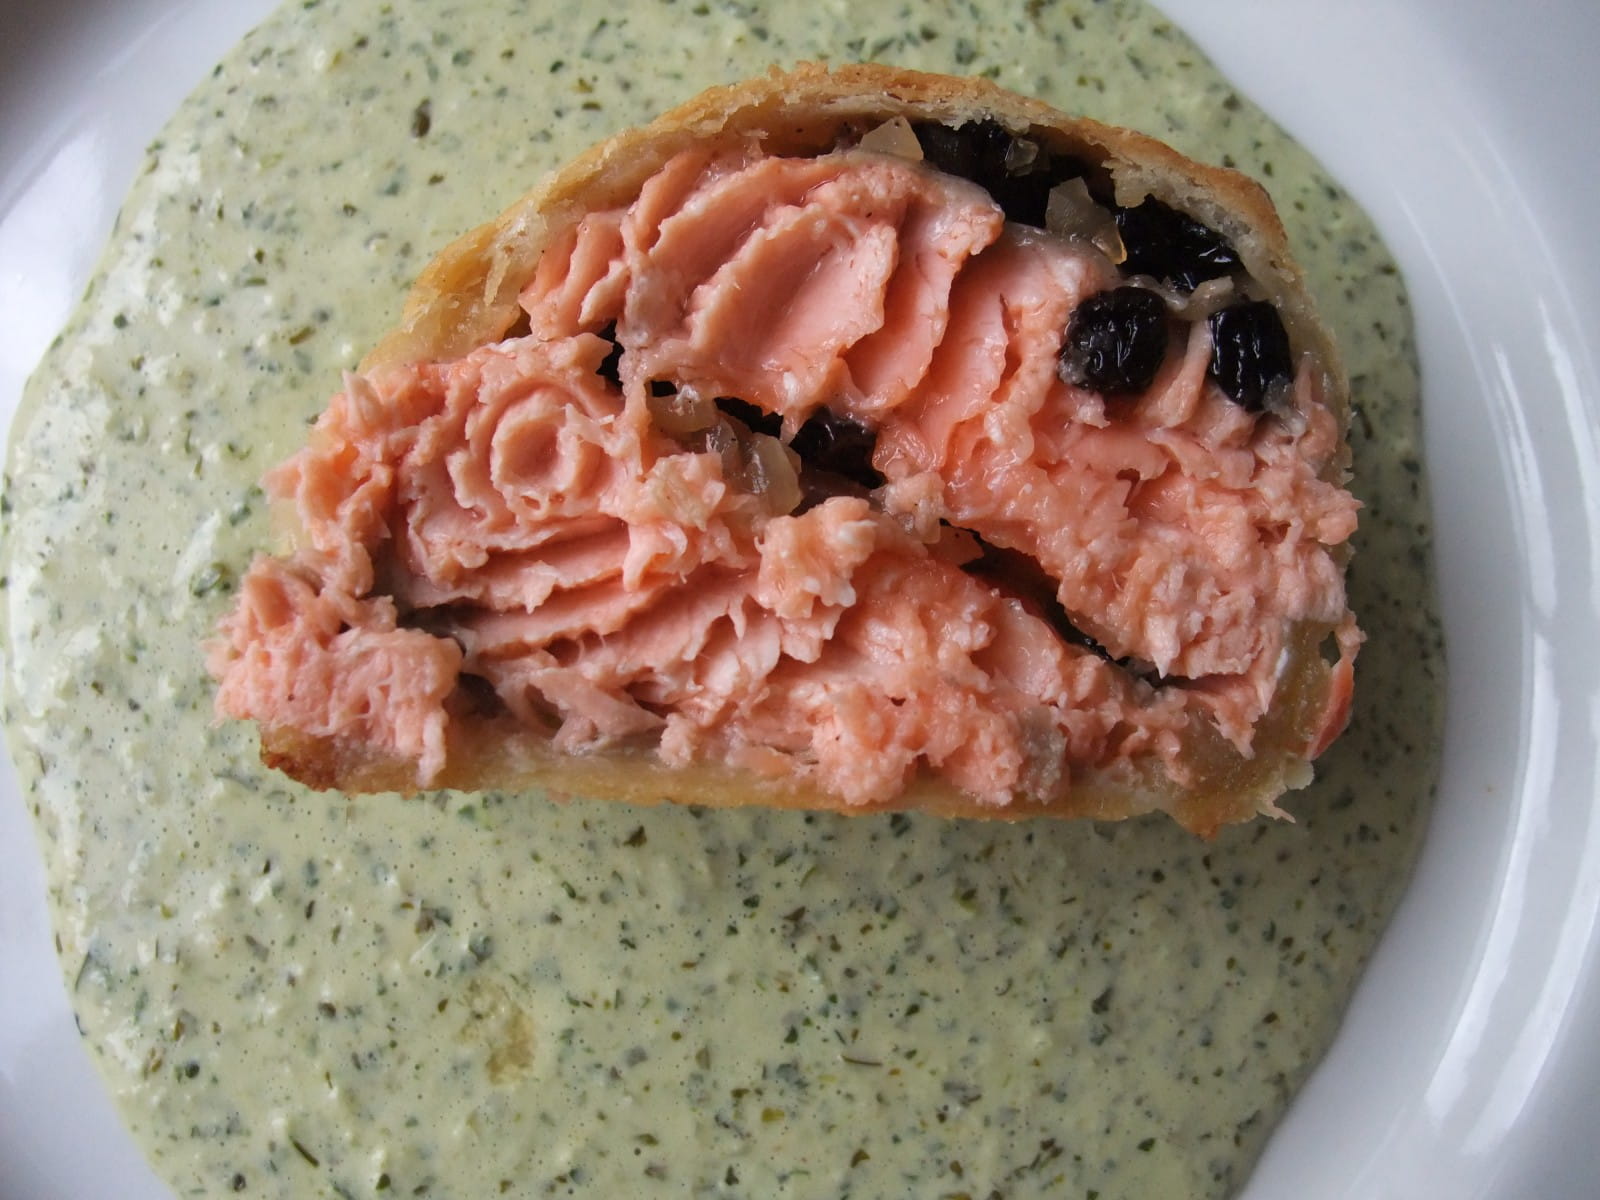 Salmon in pastry with currants and ginger